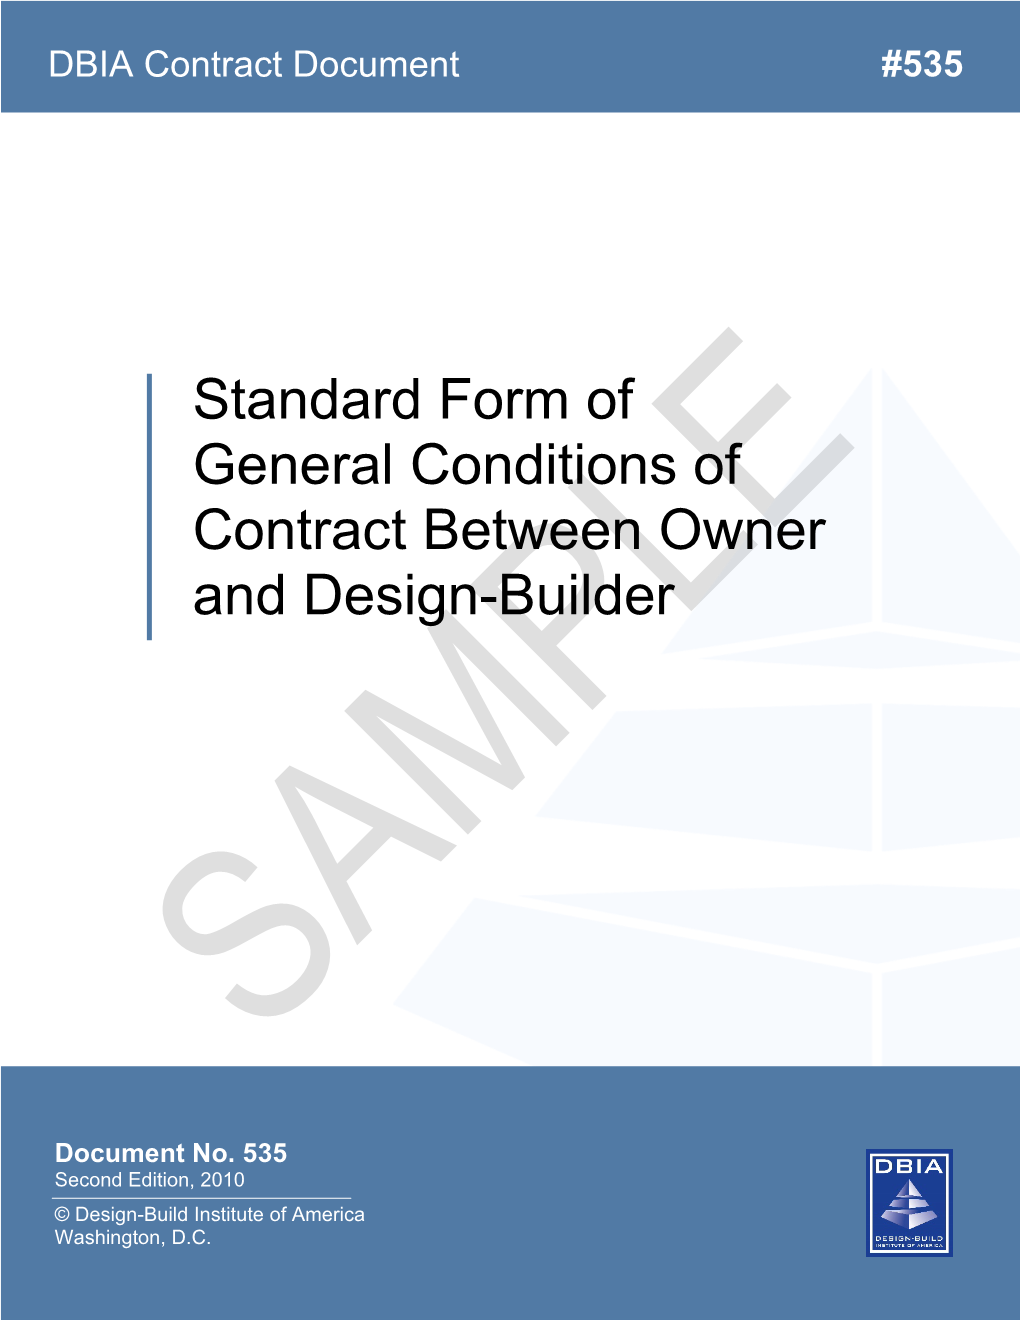 Standard Form of General Conditions of Contract Between Owner and Design-Builder